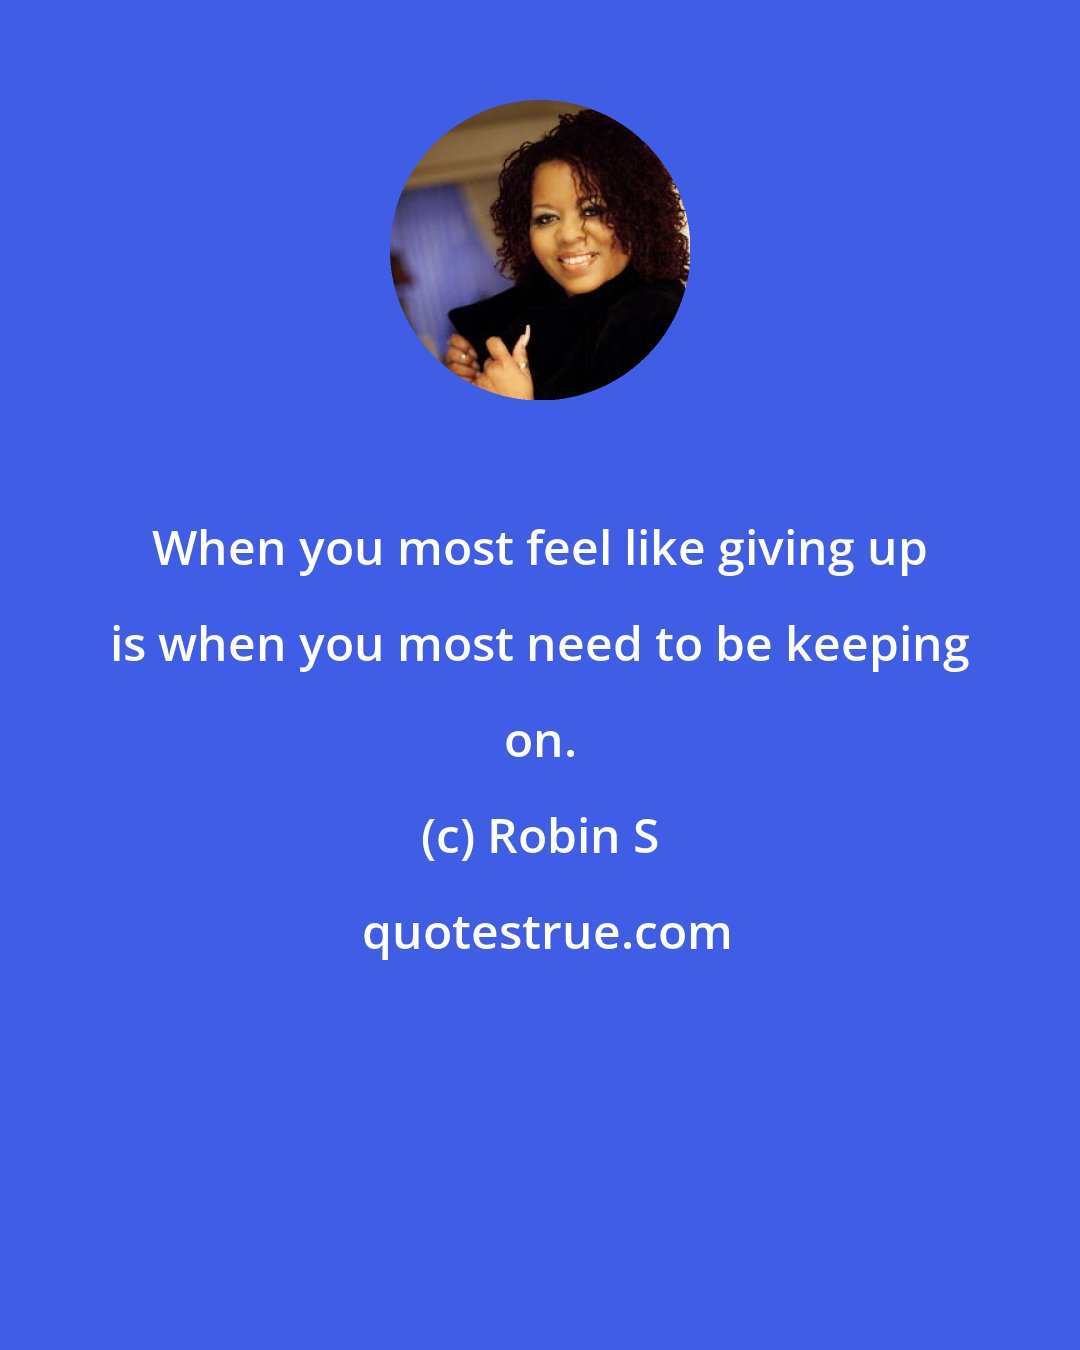 Robin S: When you most feel like giving up is when you most need to be keeping on.